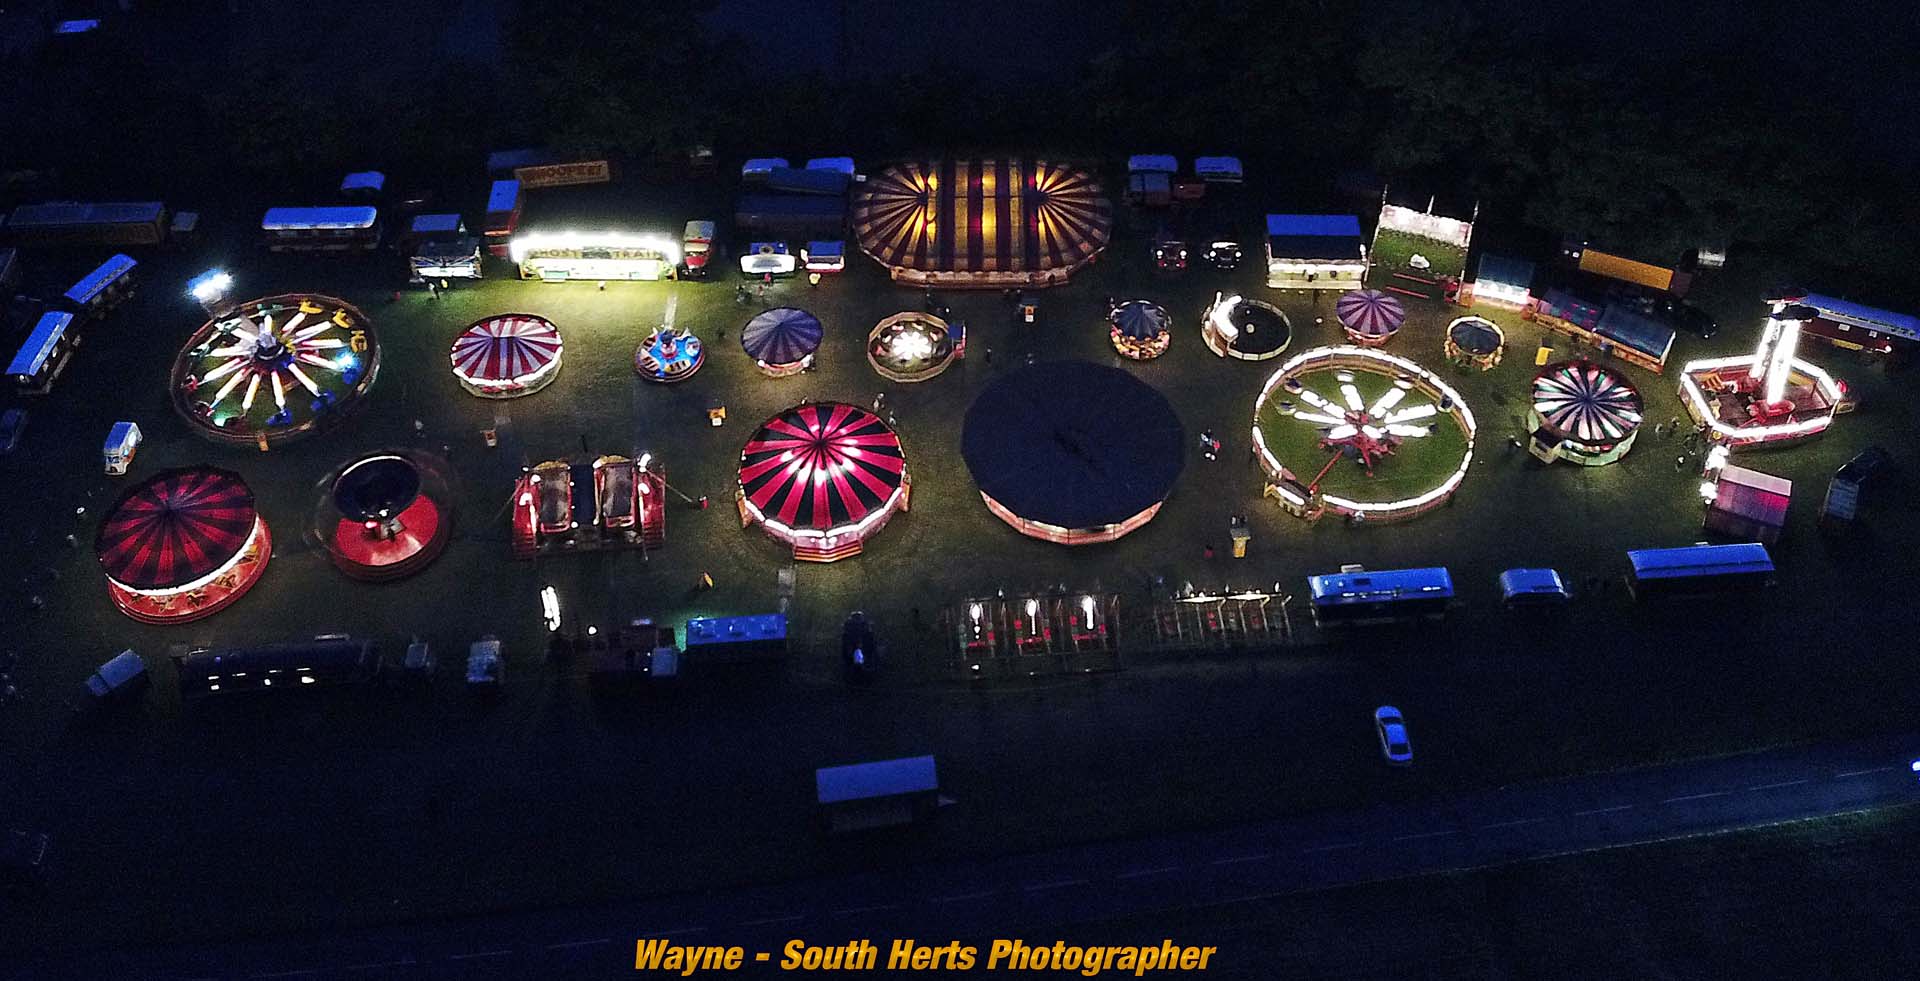 Croxley welcomed the annual visit of Carters Famous Steam Fair for 2017 drone view